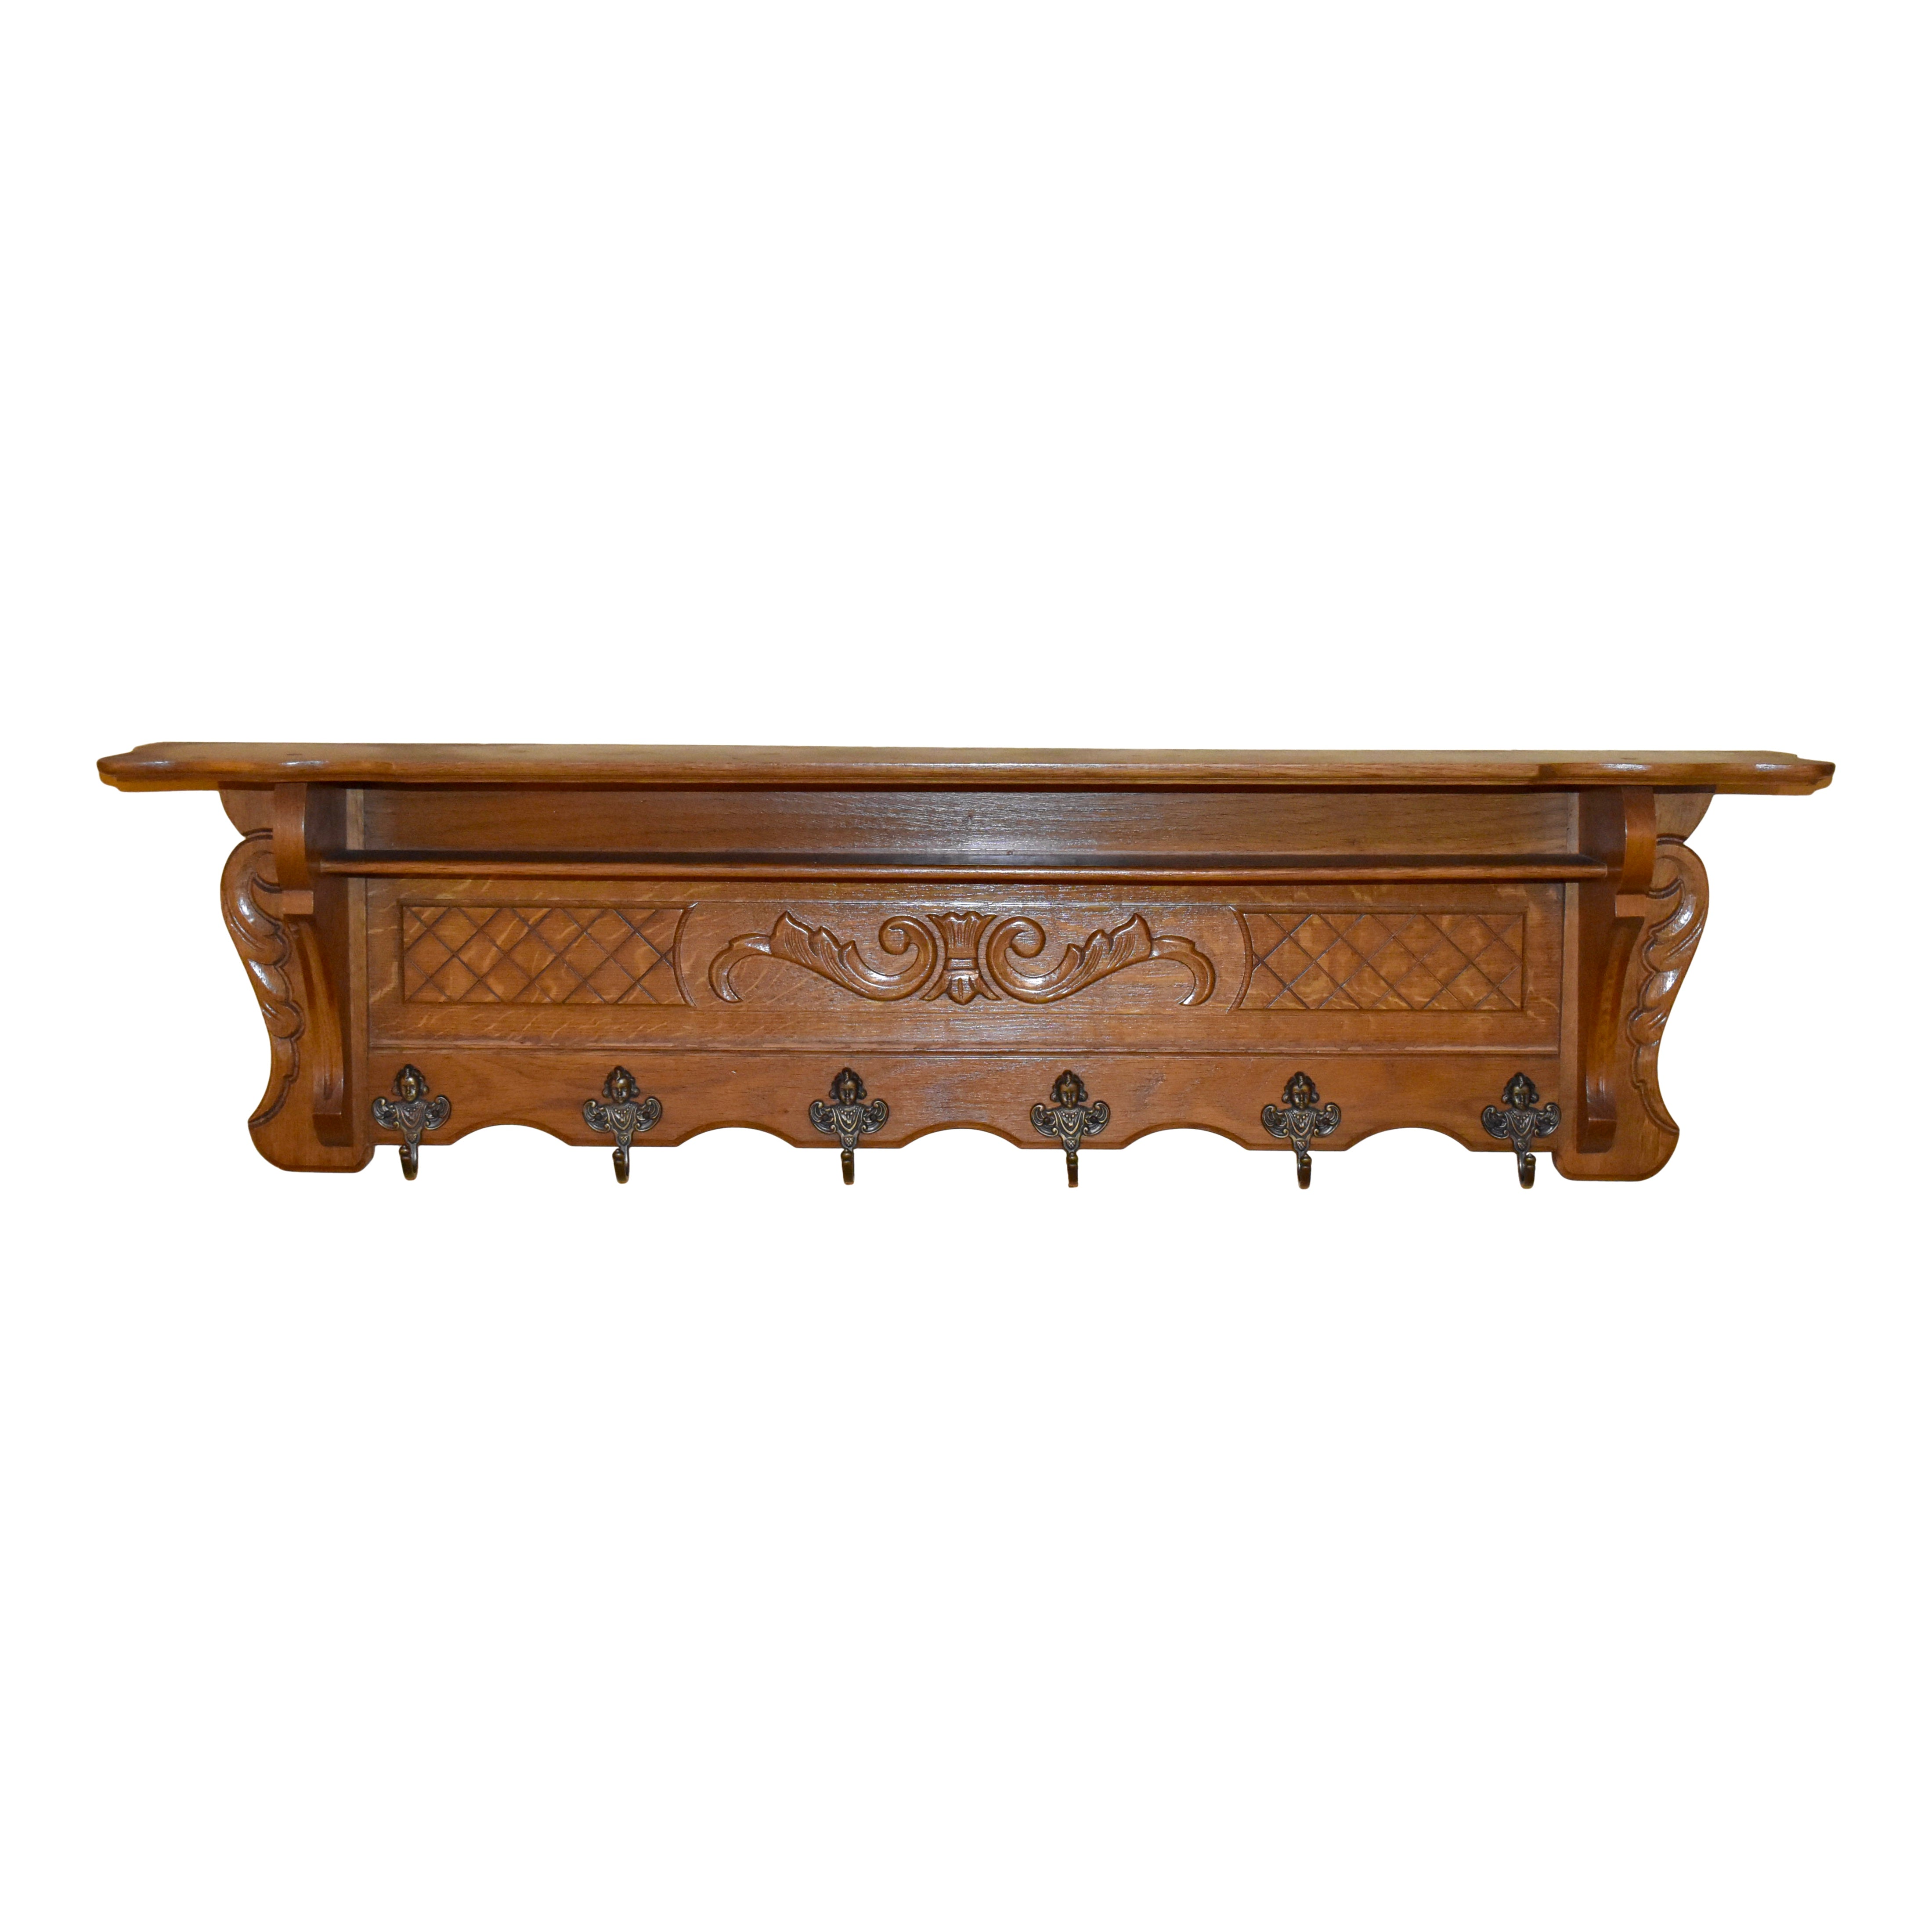 Carved Oak Wall Mounted Coat Rack with Shelves